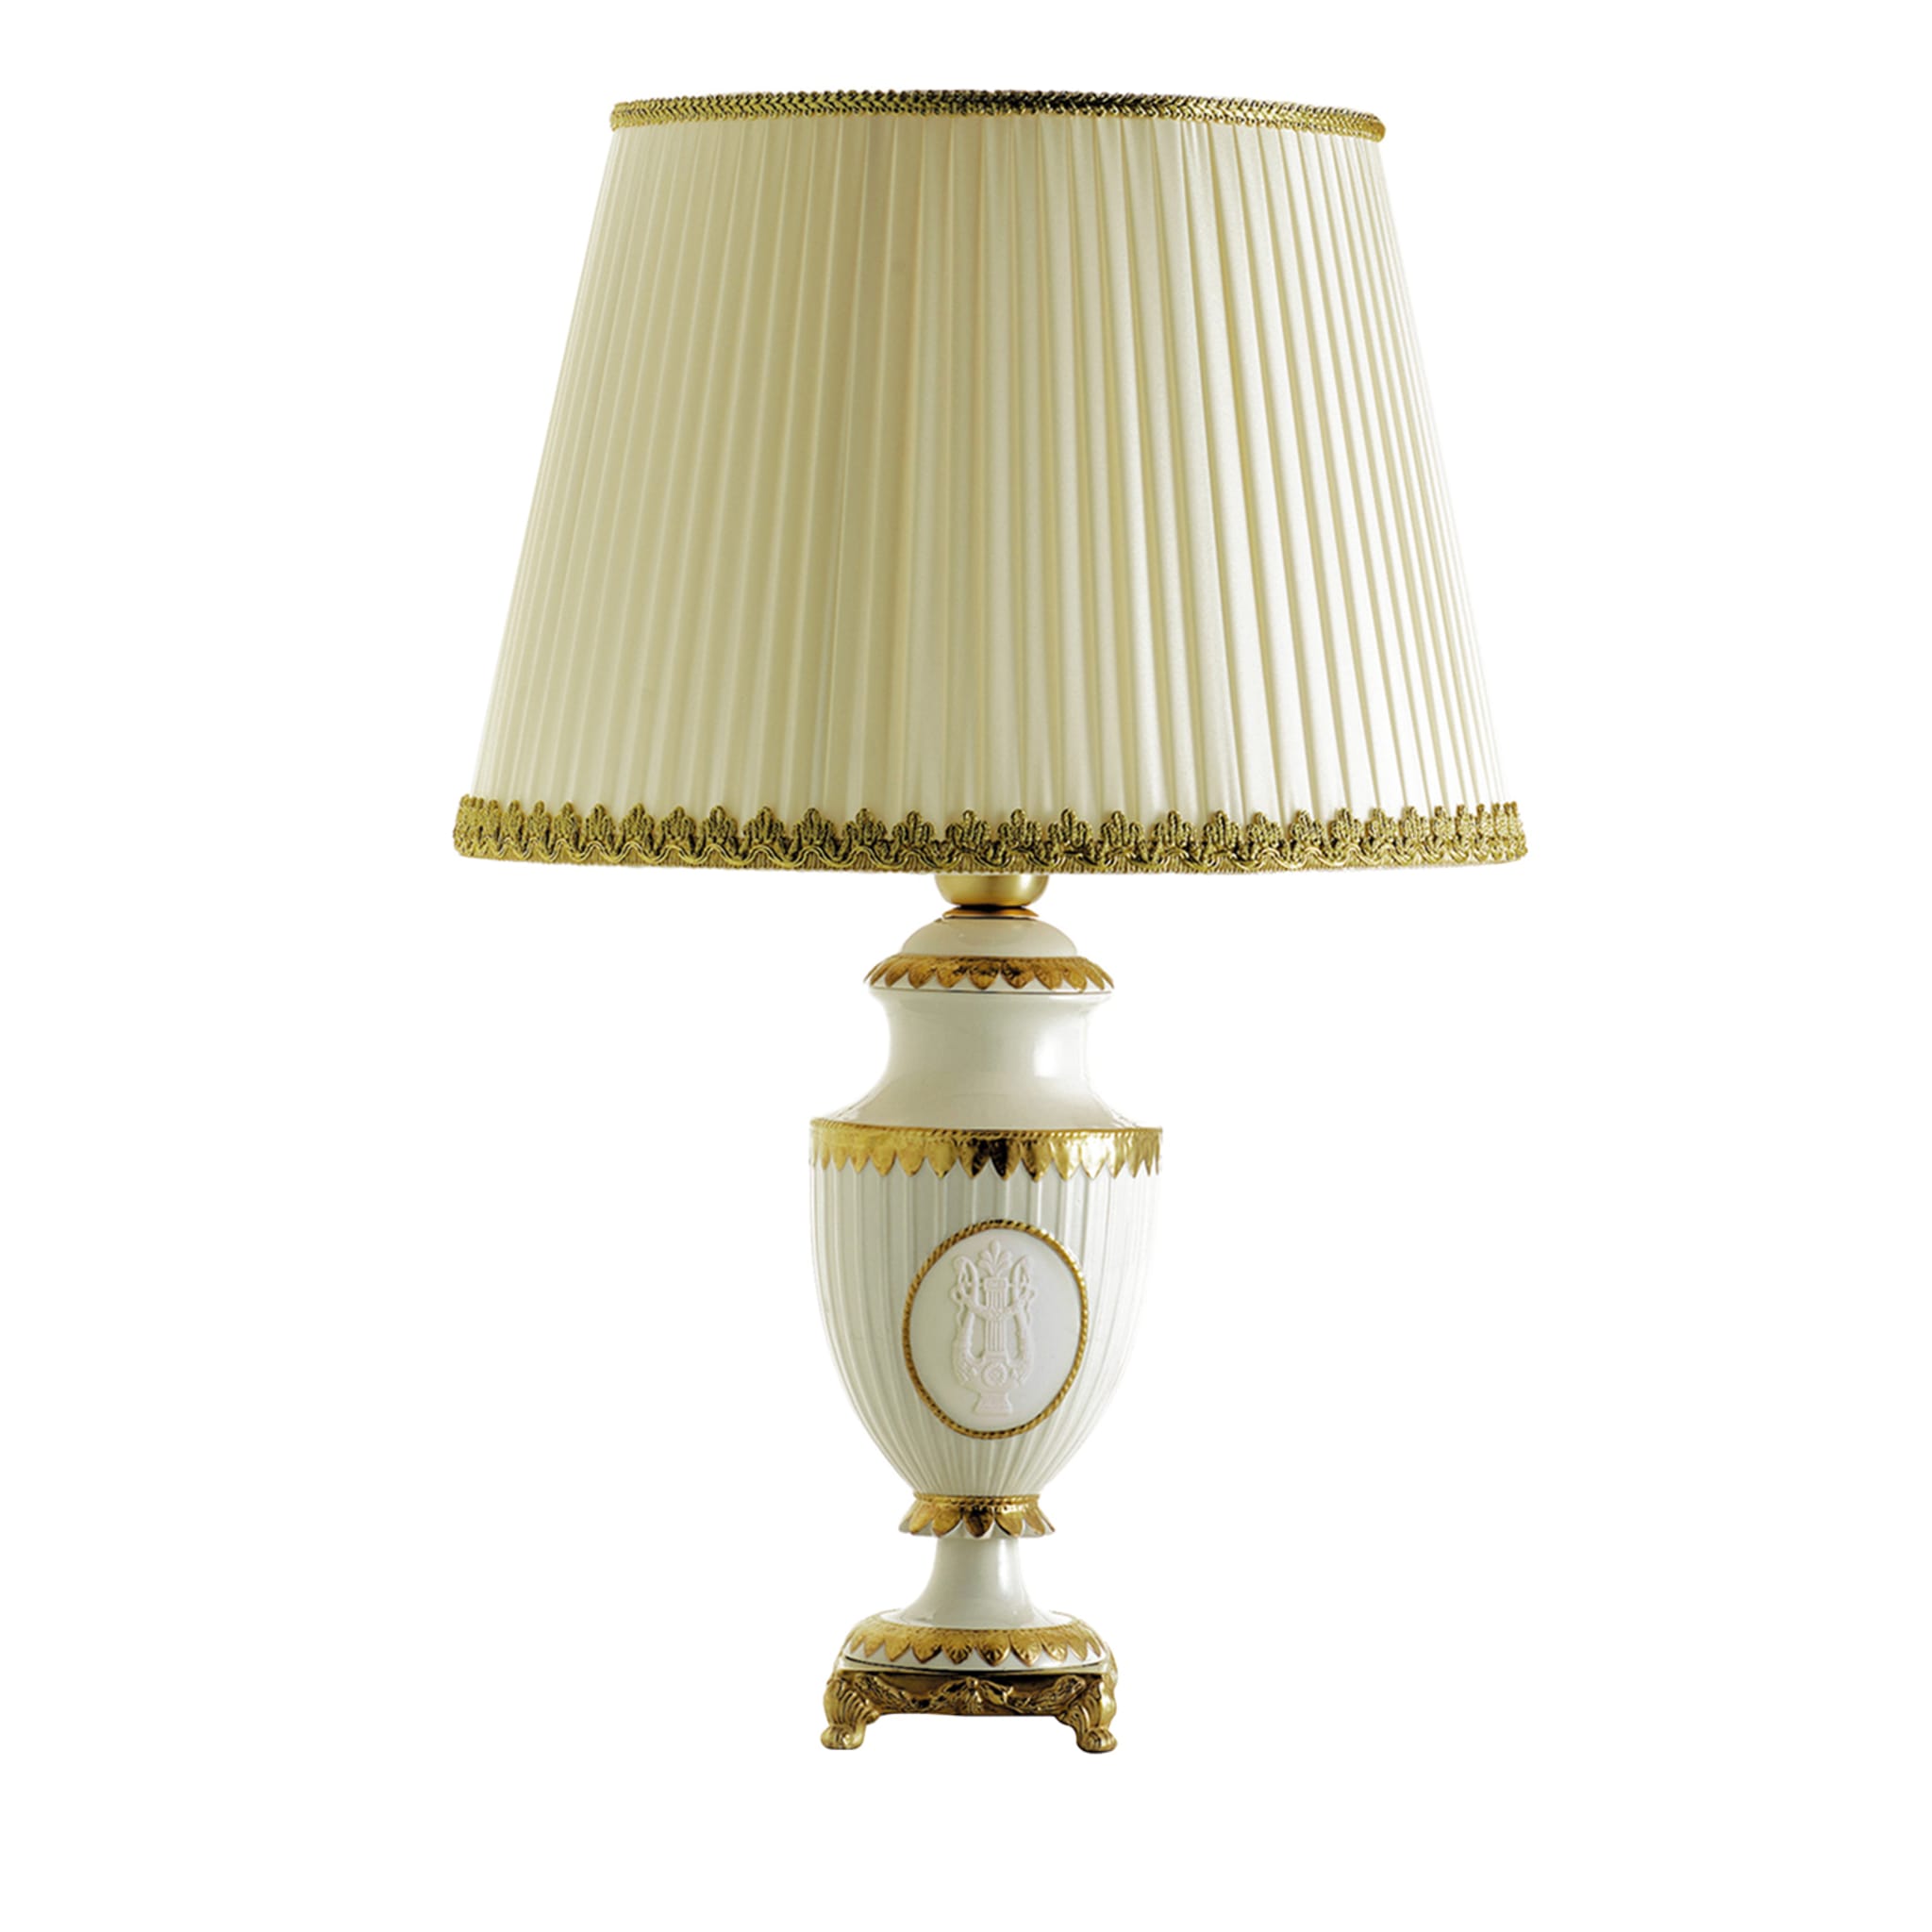 Napoleone II Small Gold and White Table Lamp - Main view